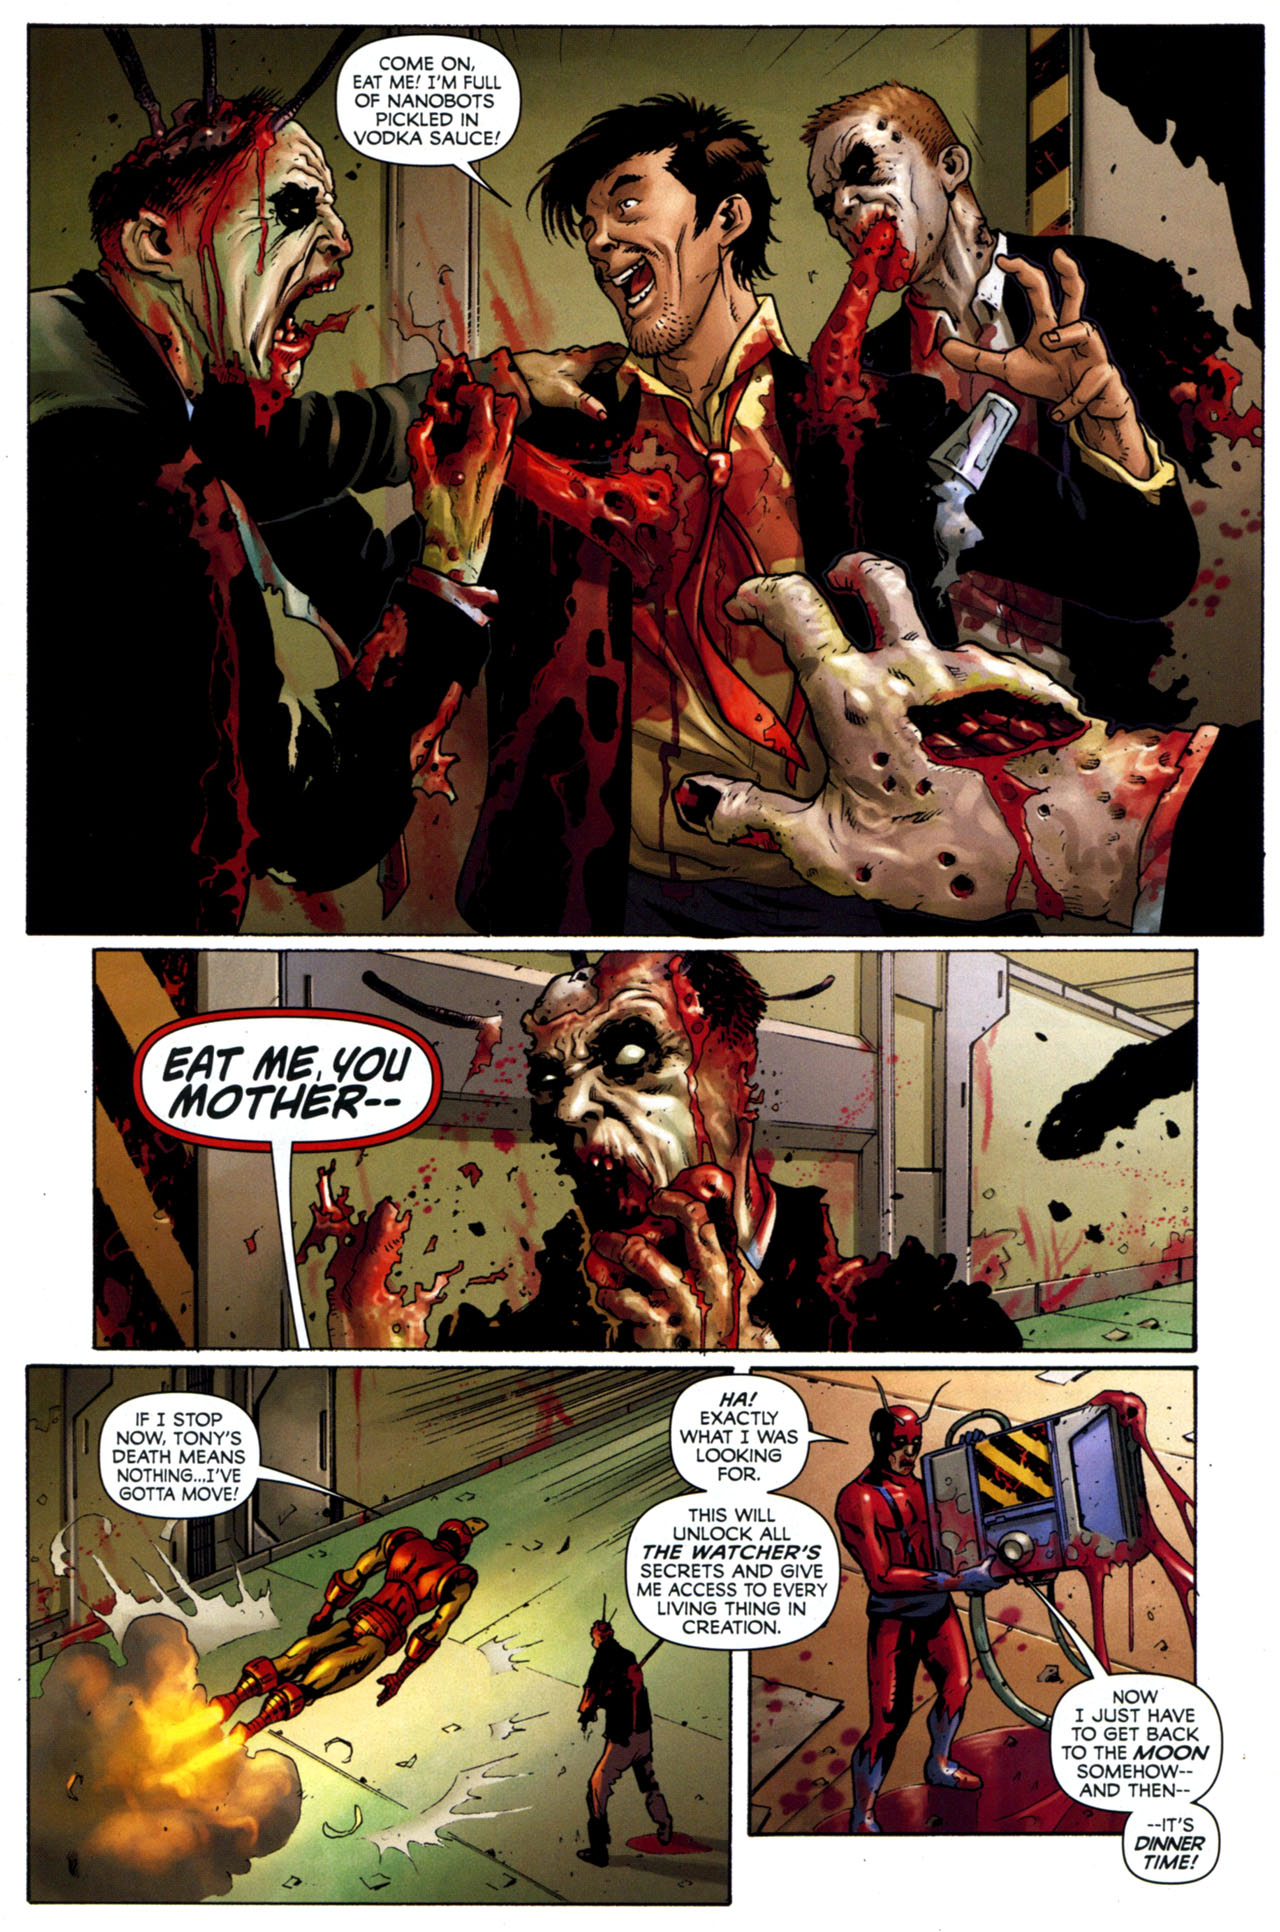 Marvel Zombies - The Return 02 of 05